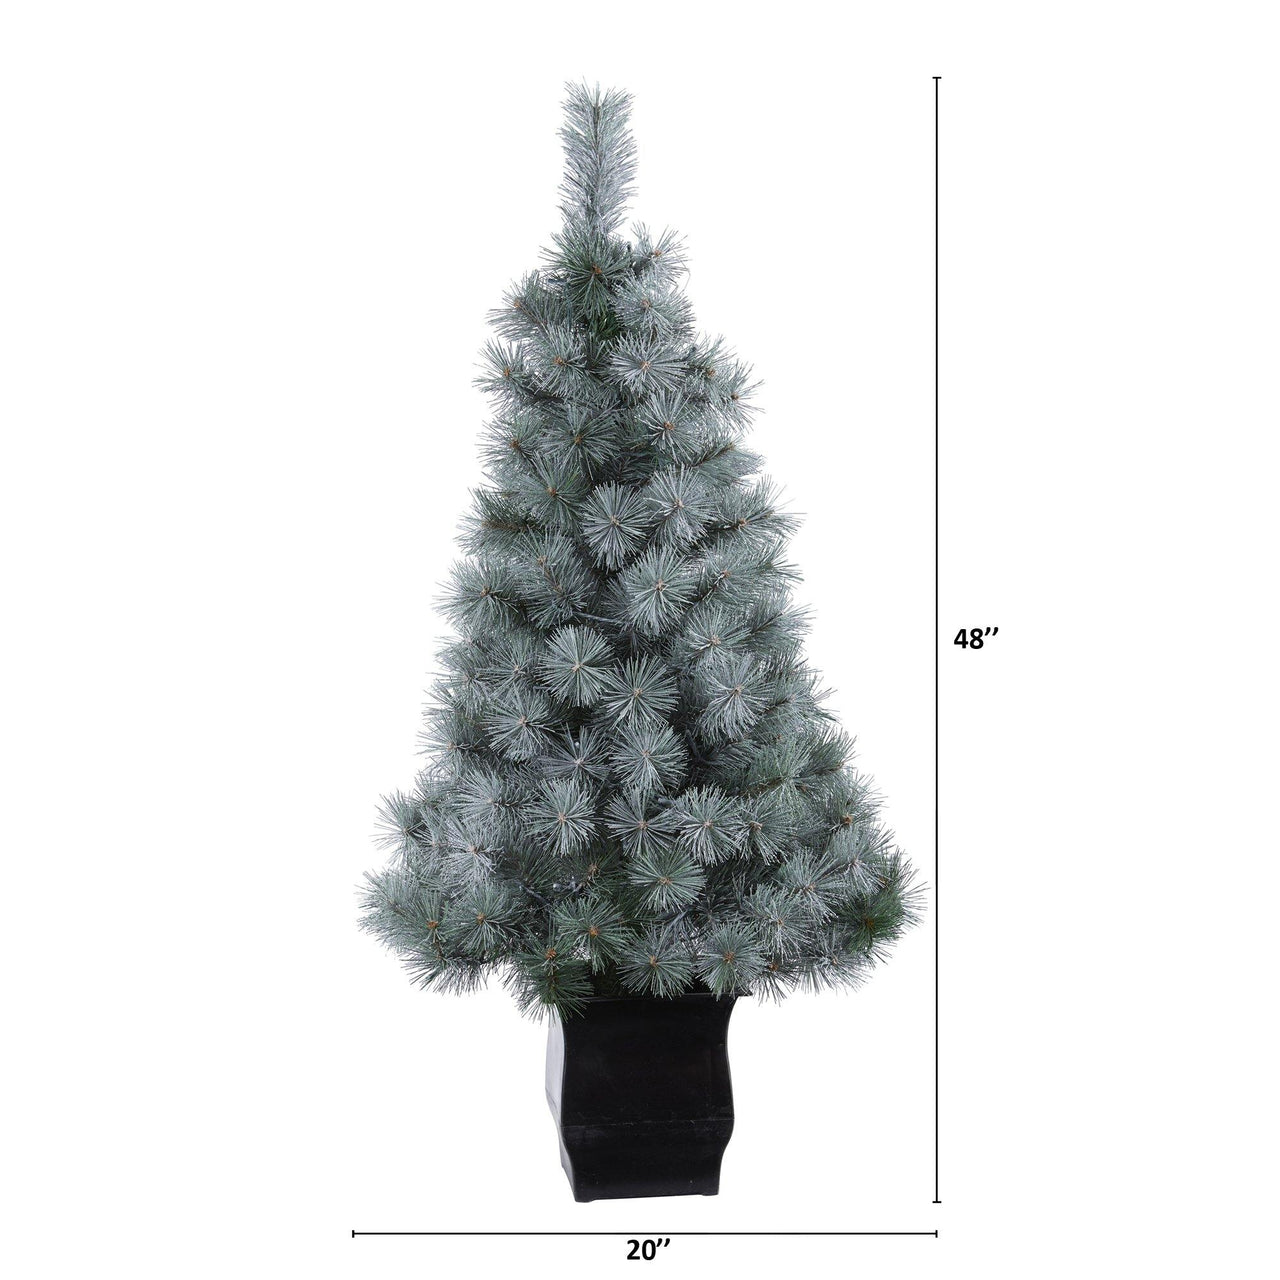 4' Snowy Mountain Pine Artificial Christmas Tree with 150 LED Lights and Decorative Planter - The Fox Decor